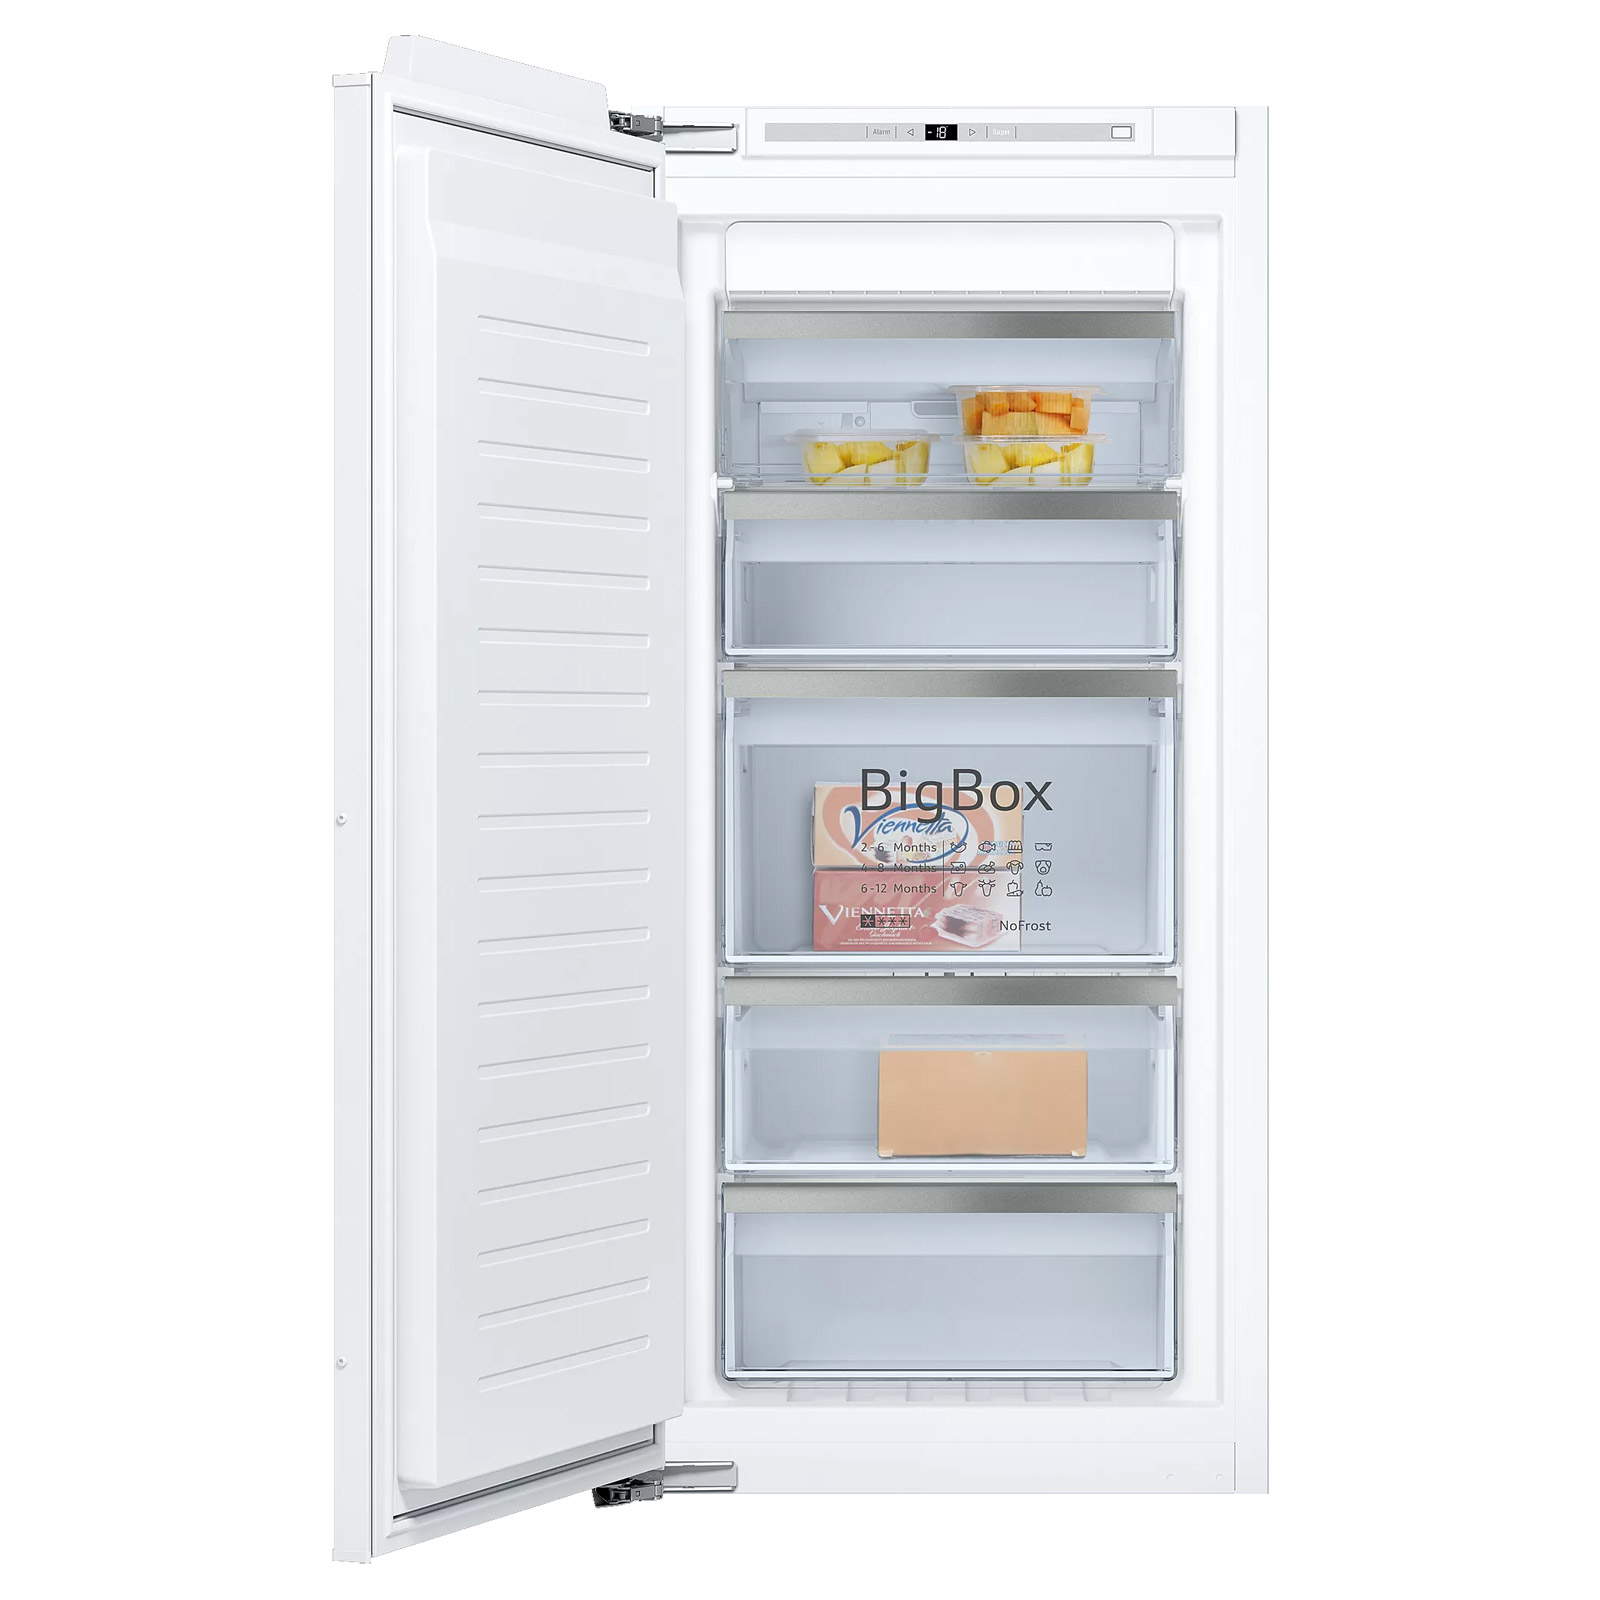 Image of Neff GI7416CE0 N70 56cm Built In Frost Free Freezer 1 22m E Rated 130L